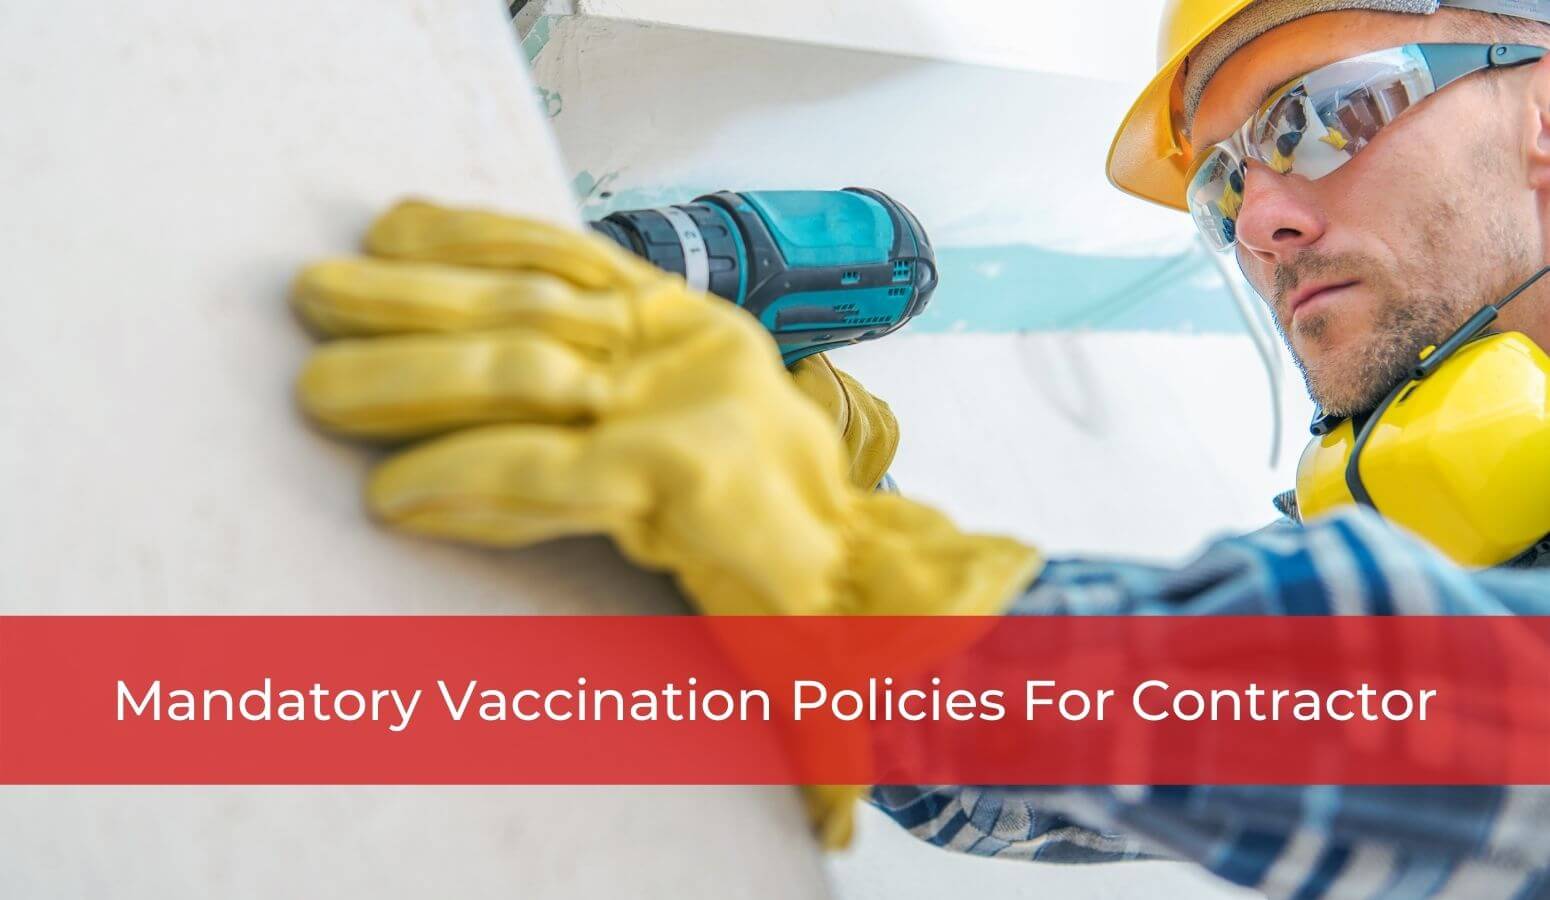 Mandatory vaccination policies for contractors - Whitten & Lublin Employment Lawyers - Toronto Employment Lawyers